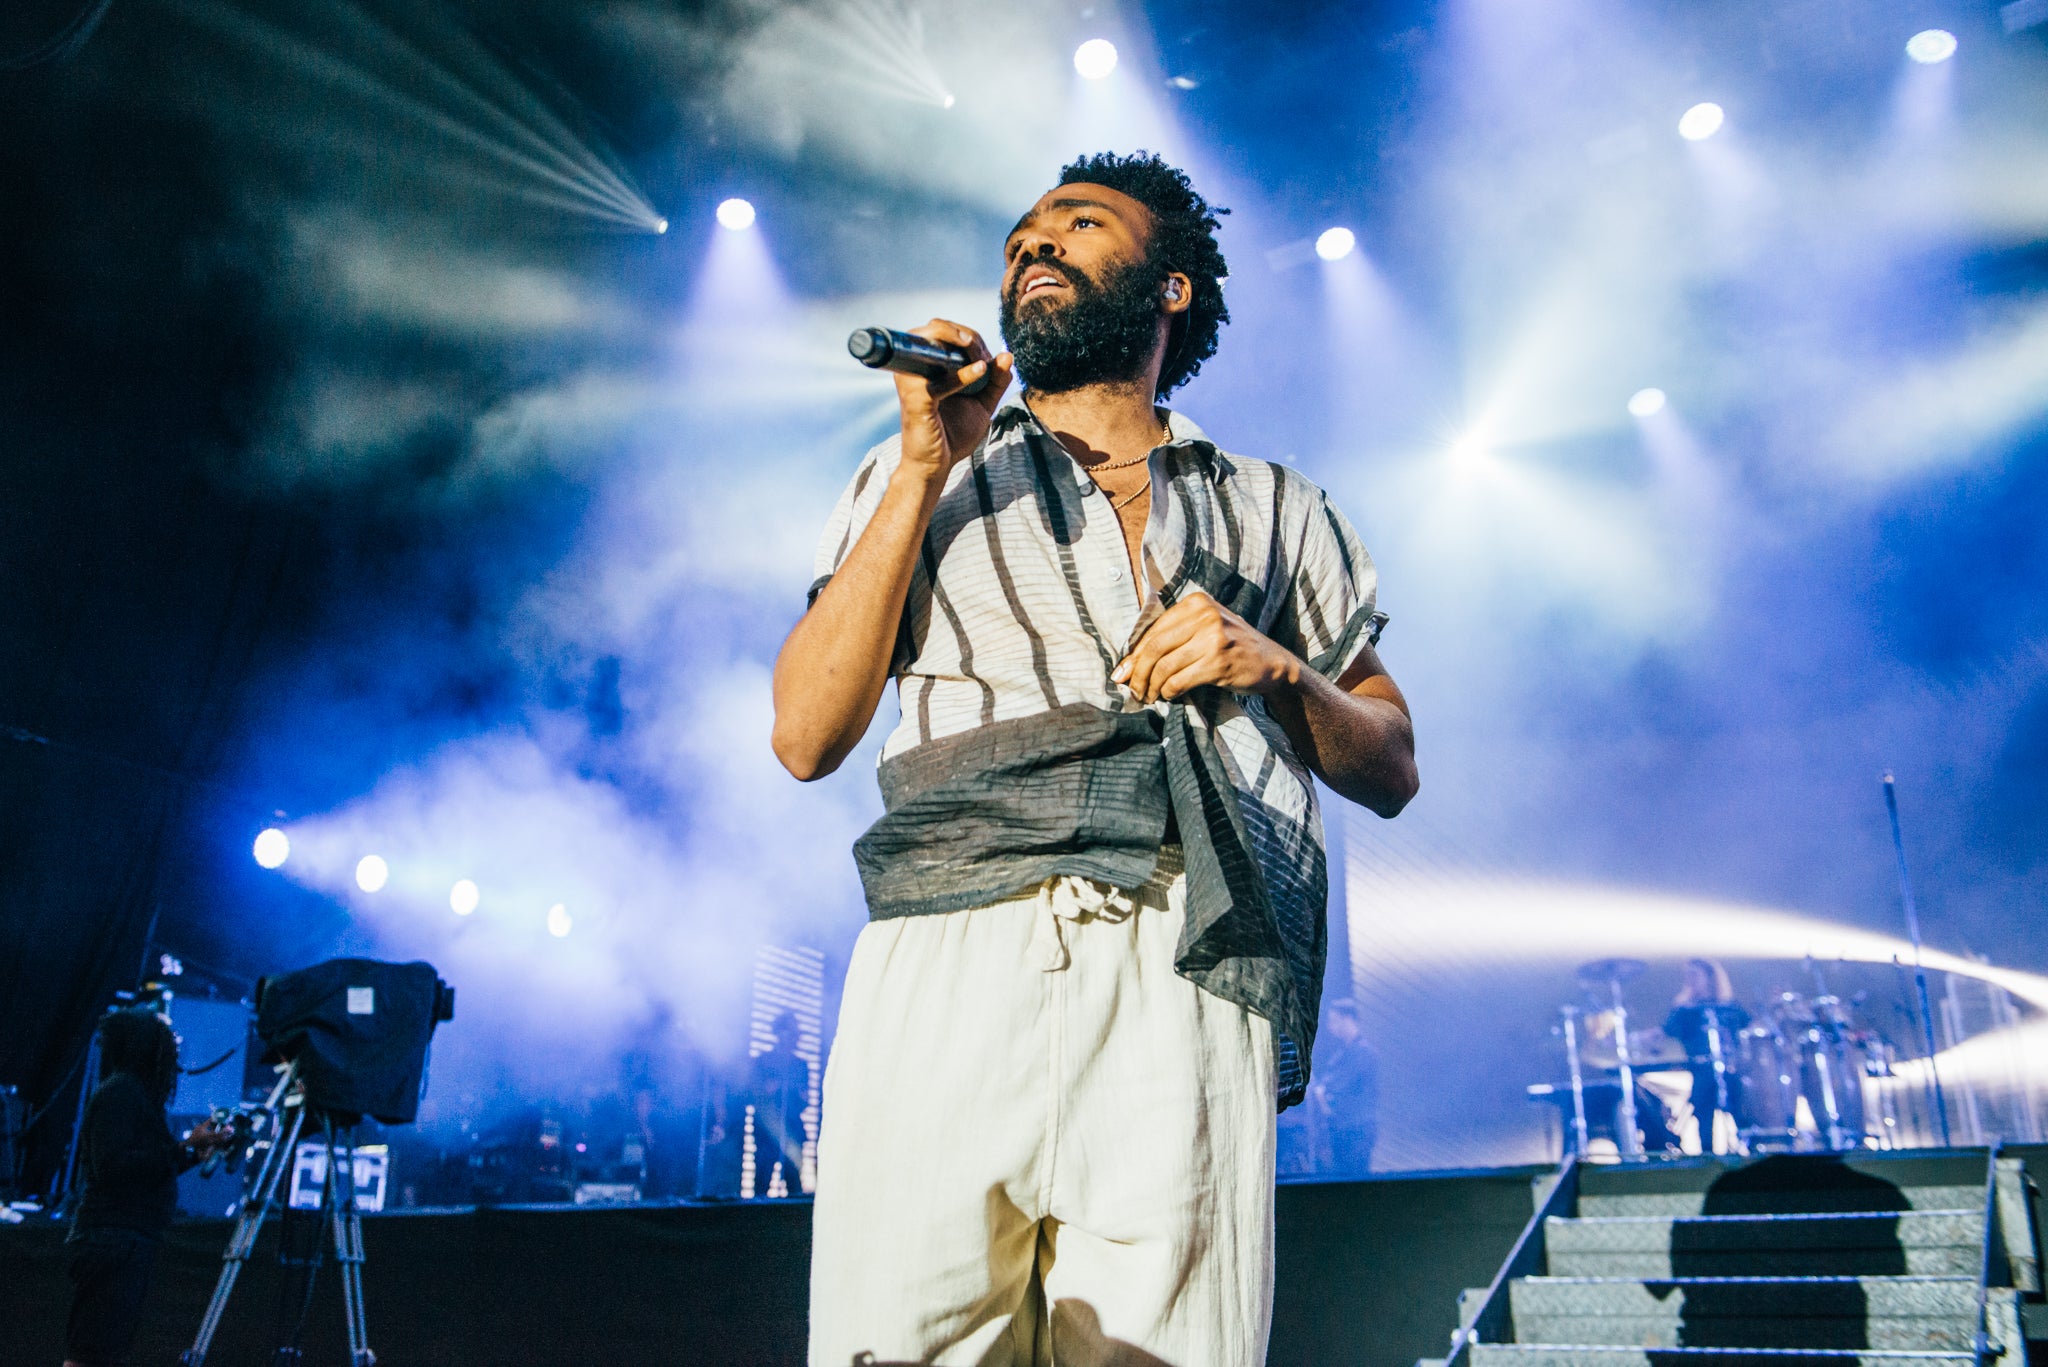 Childish Gambino announces second date at O2 Arena for 2019 How to get